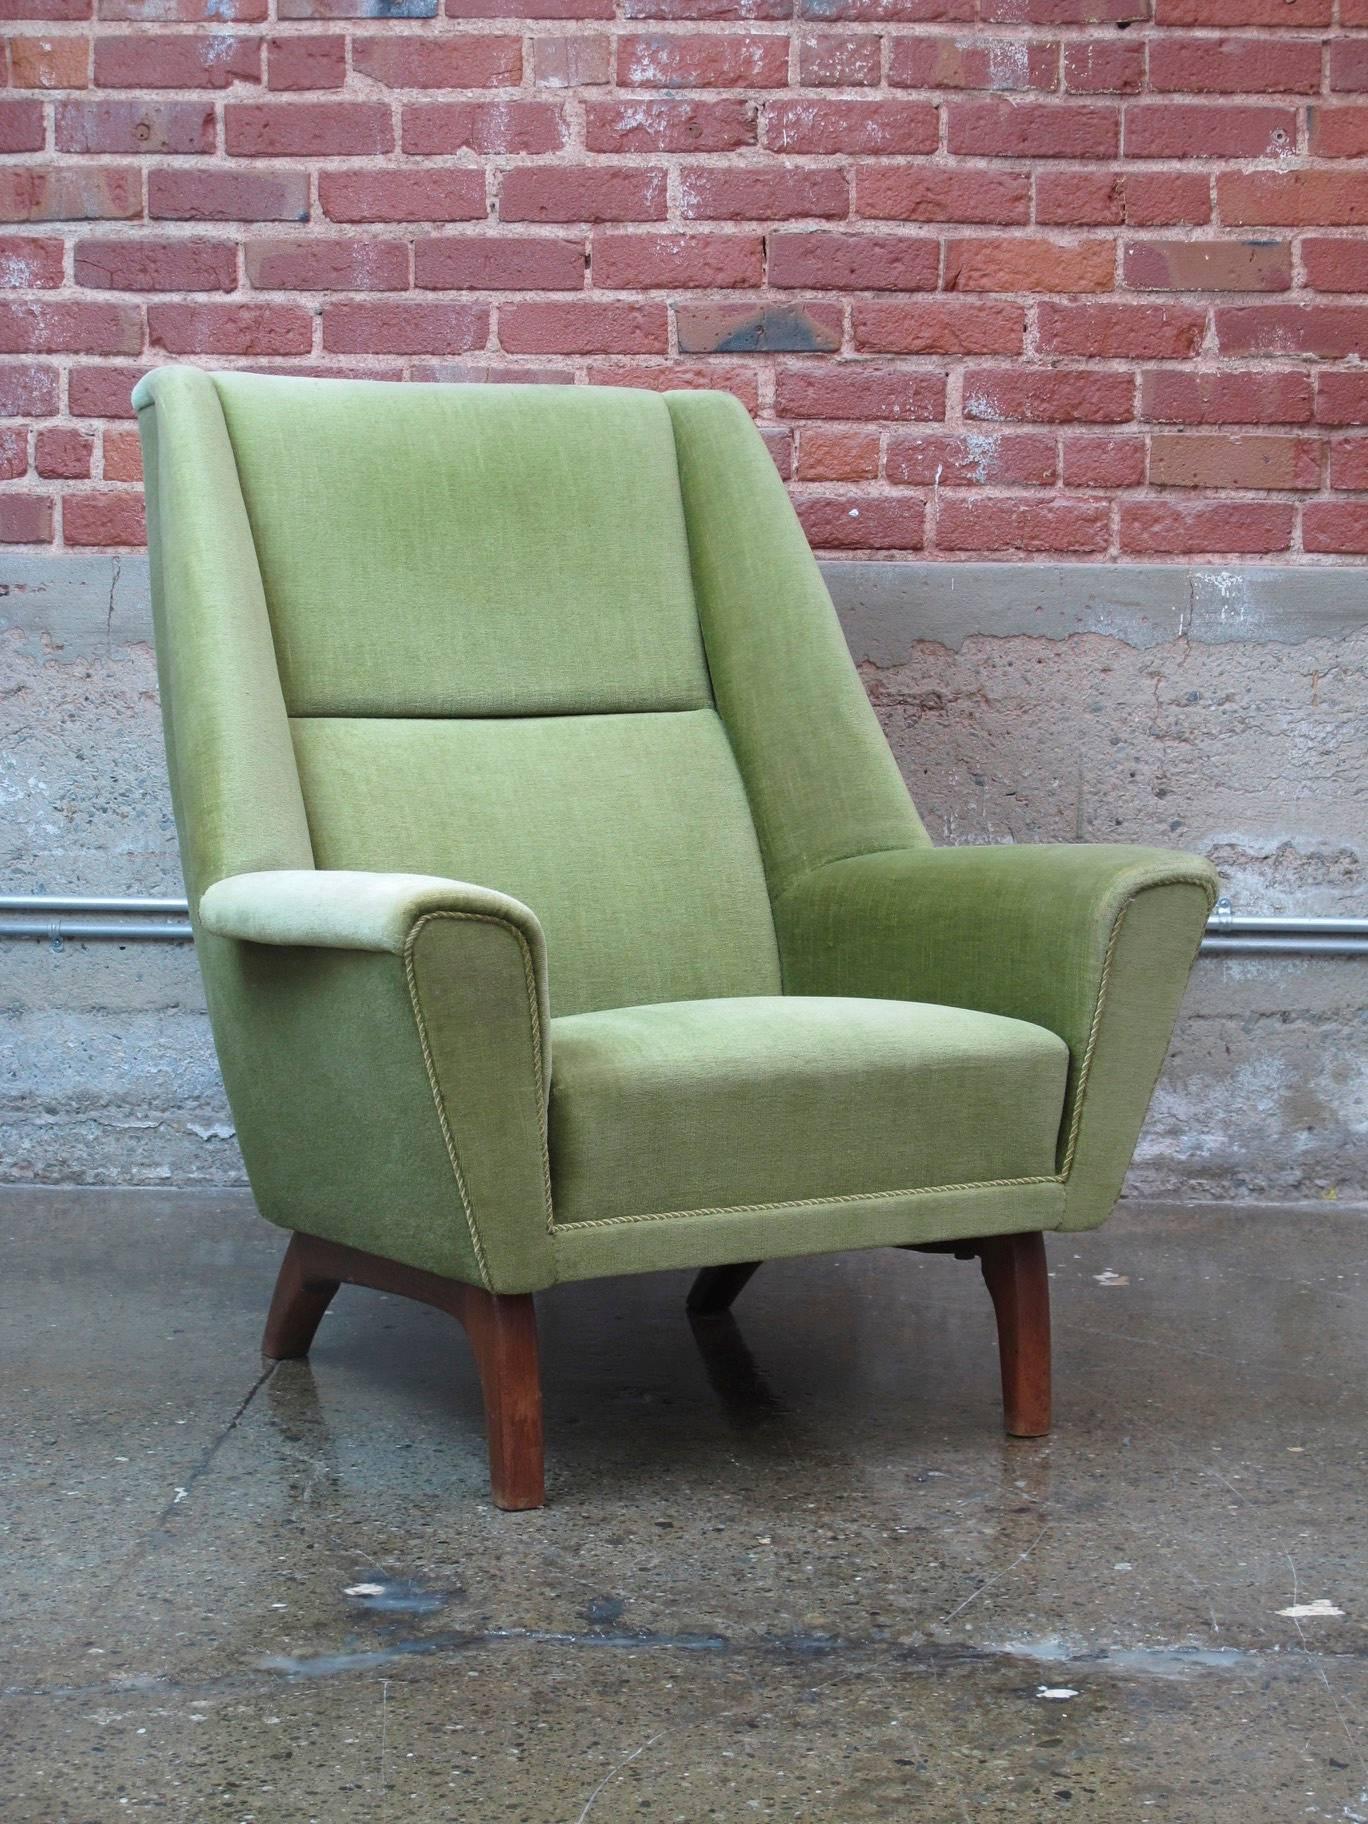 Scandinavian midcentury upholstered lounge chair upholstered in the original green mohair fabric over a solid wood frame with inner spring seat.
Measure: Seat interior depth 20.35 x width 26.25.

 